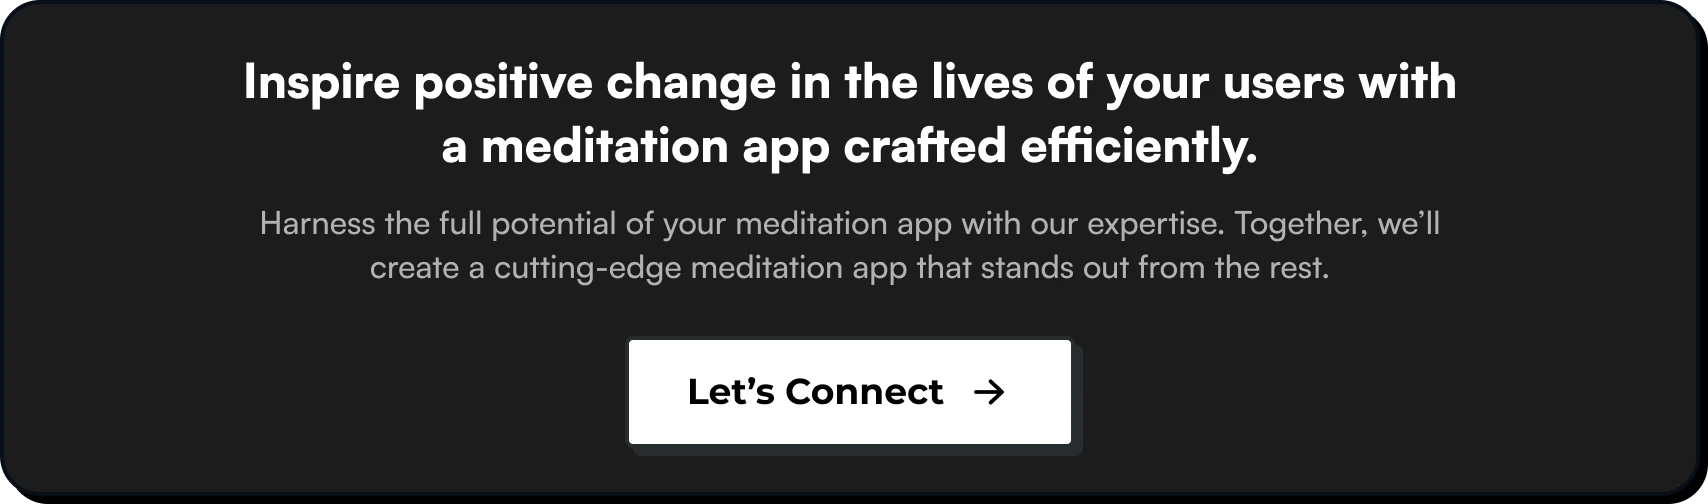 Inspire positive change in the lives of your users with a meditation app crafted efficiently. Harness the full potential of your meditation app with our app development expertise. Together, we’ll create a cutting-edge meditation app that stands out from the rest.